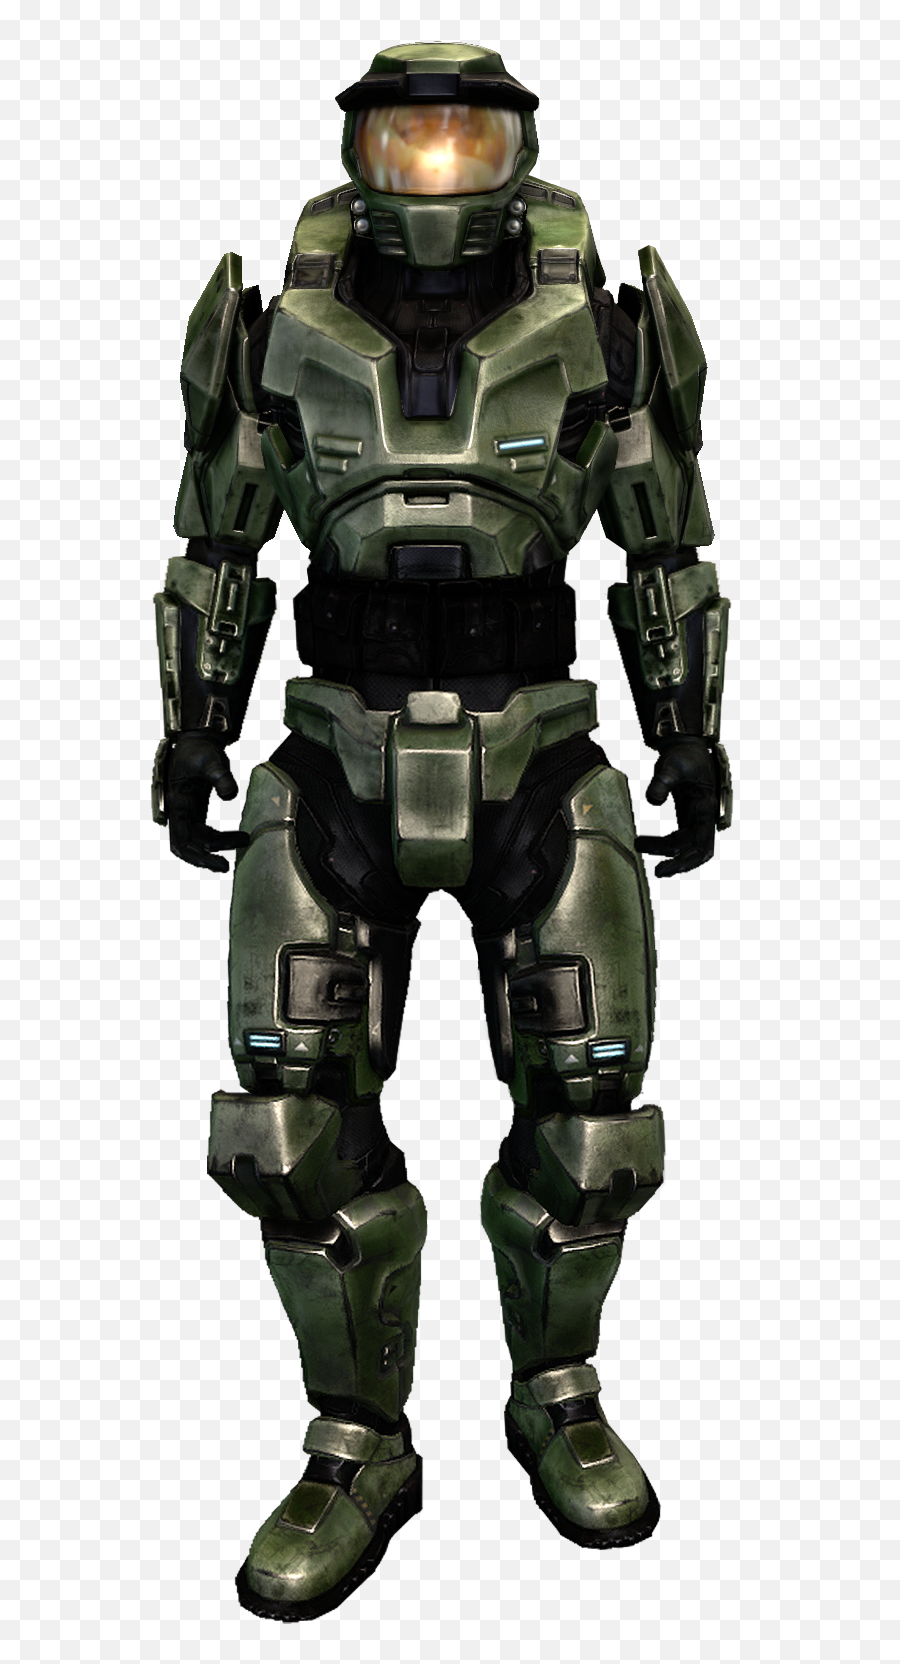 Halo Master Chief Transparent U0026 Png Clipart Free Download - Ywd Master Chief Halo Combat Evolved,Master Chief Helmet Png